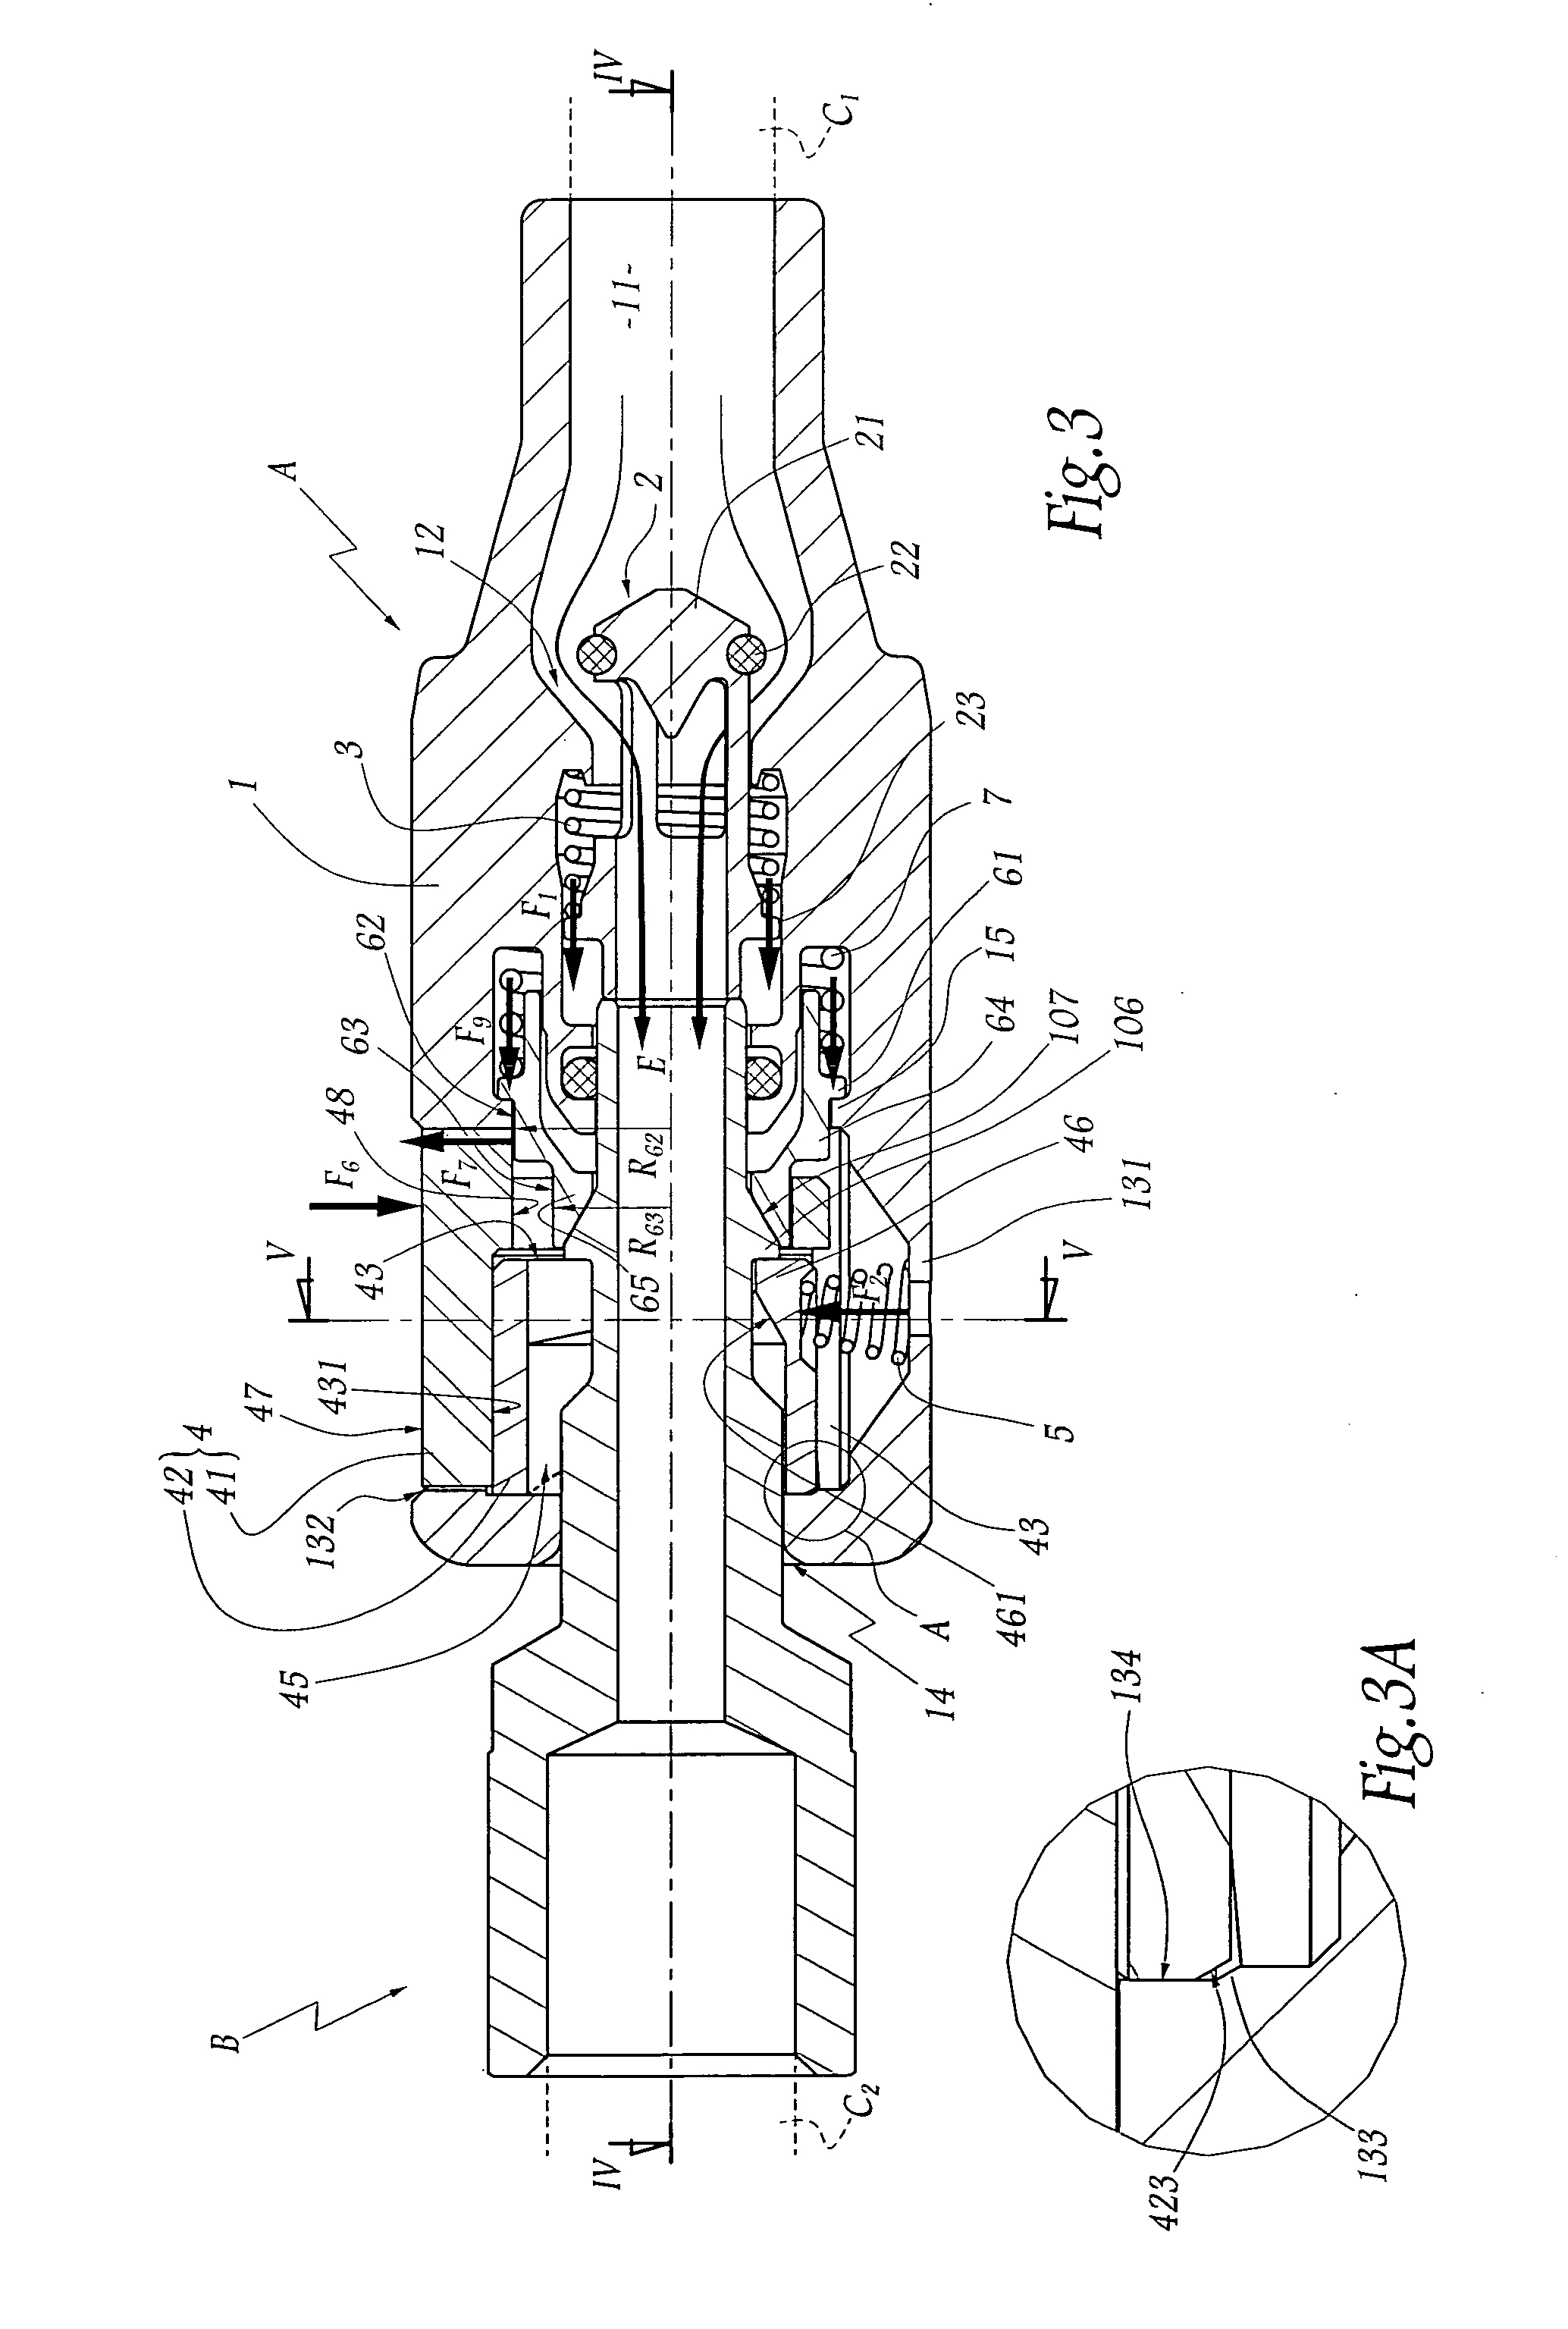 Quick connection and method for uncoupling the male and female elements of such a connection